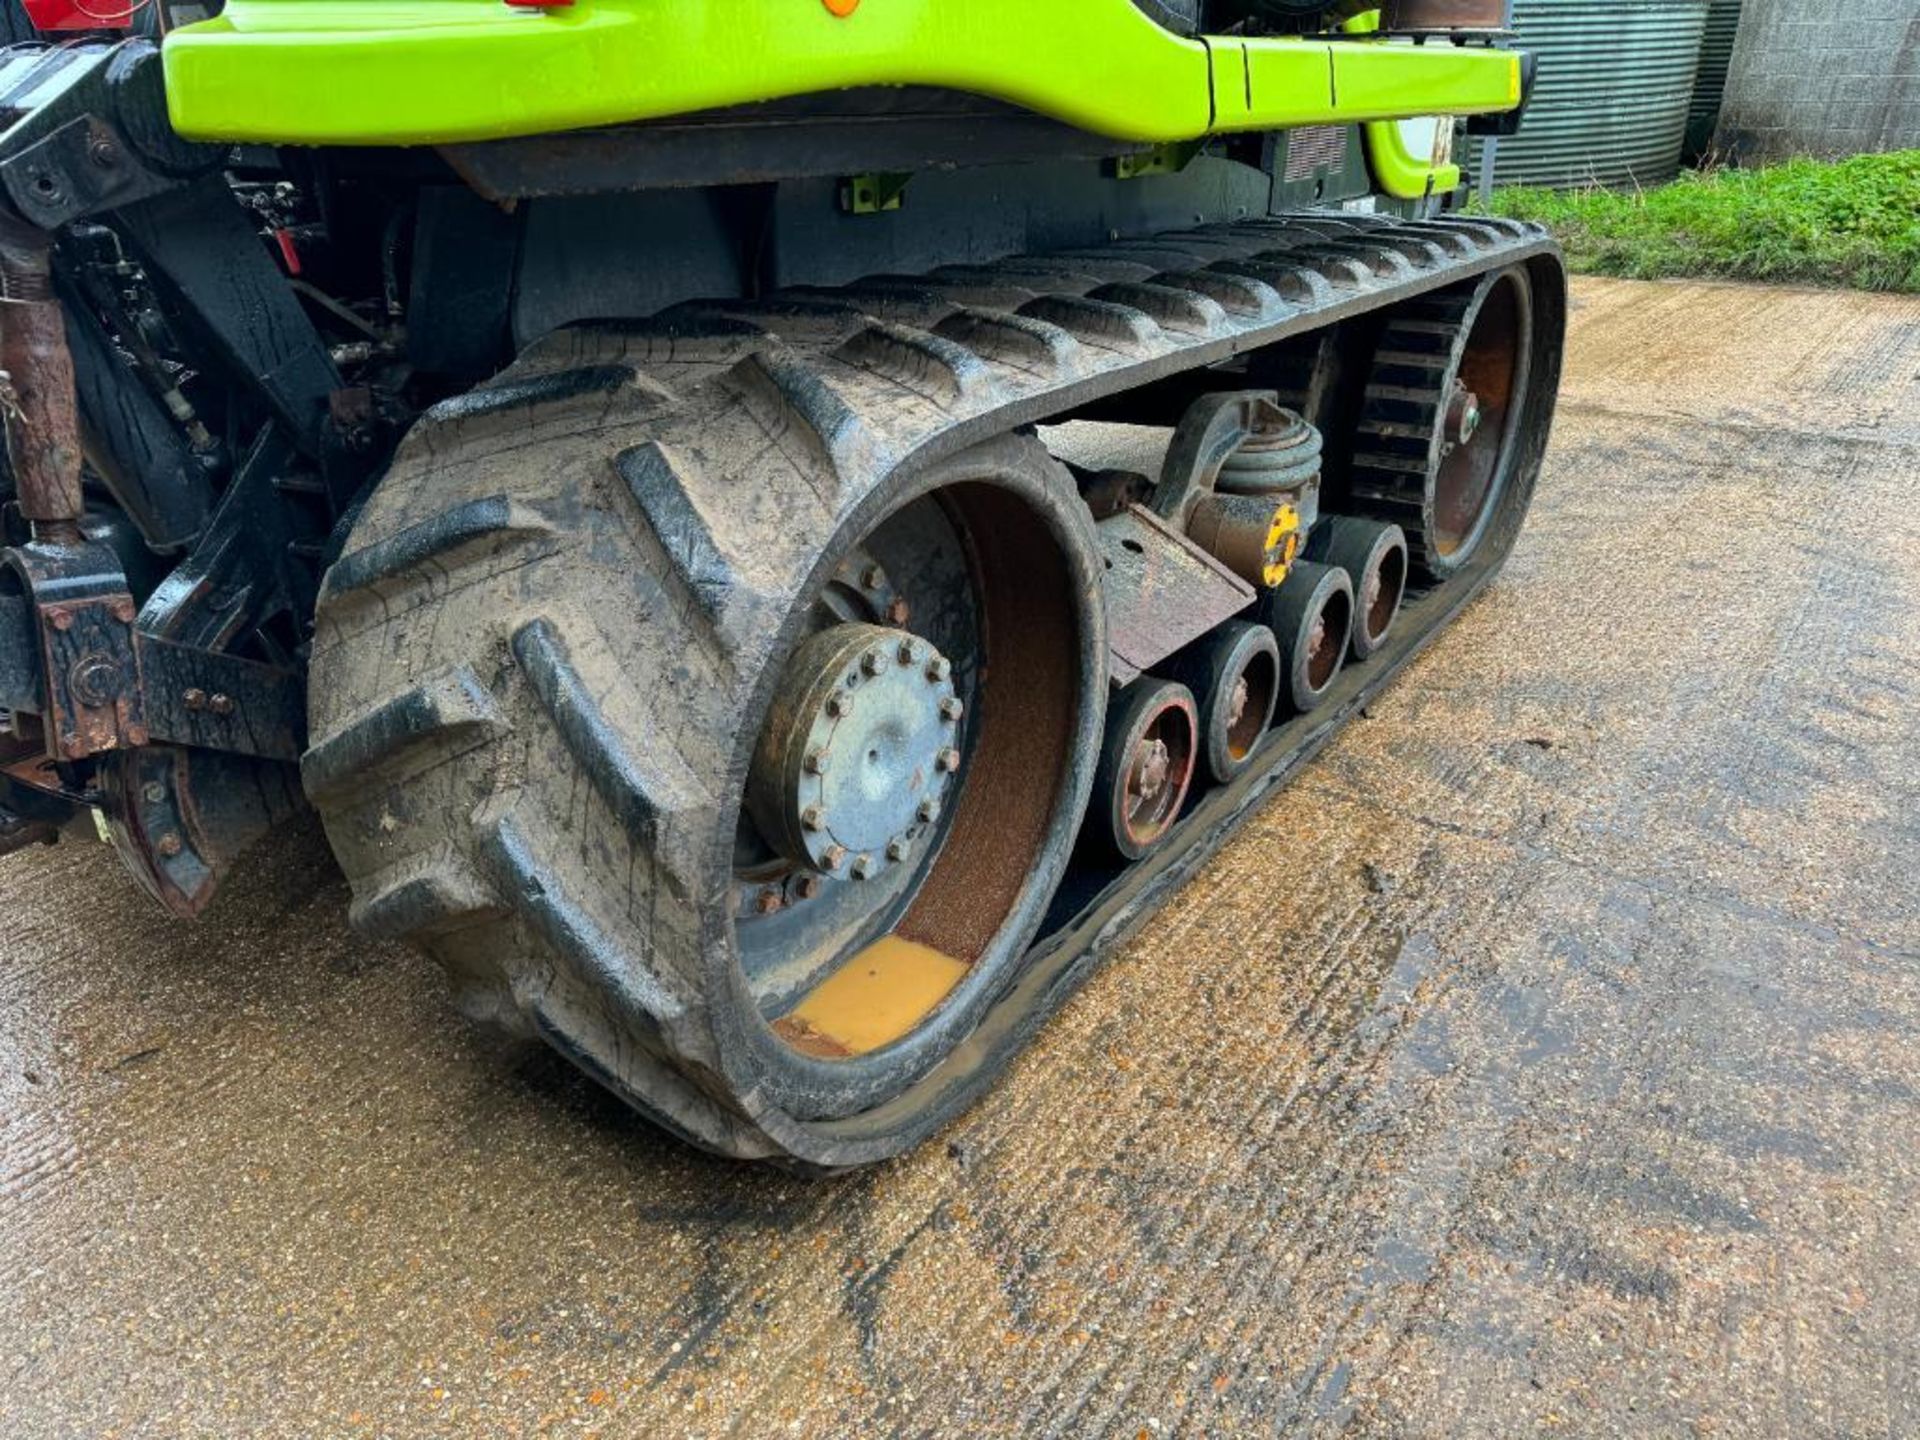 2001 Claas 75E Challenger rubber tracked crawler with 30" tracks, 20No 45kg front wafer weights, 4 m - Image 11 of 26